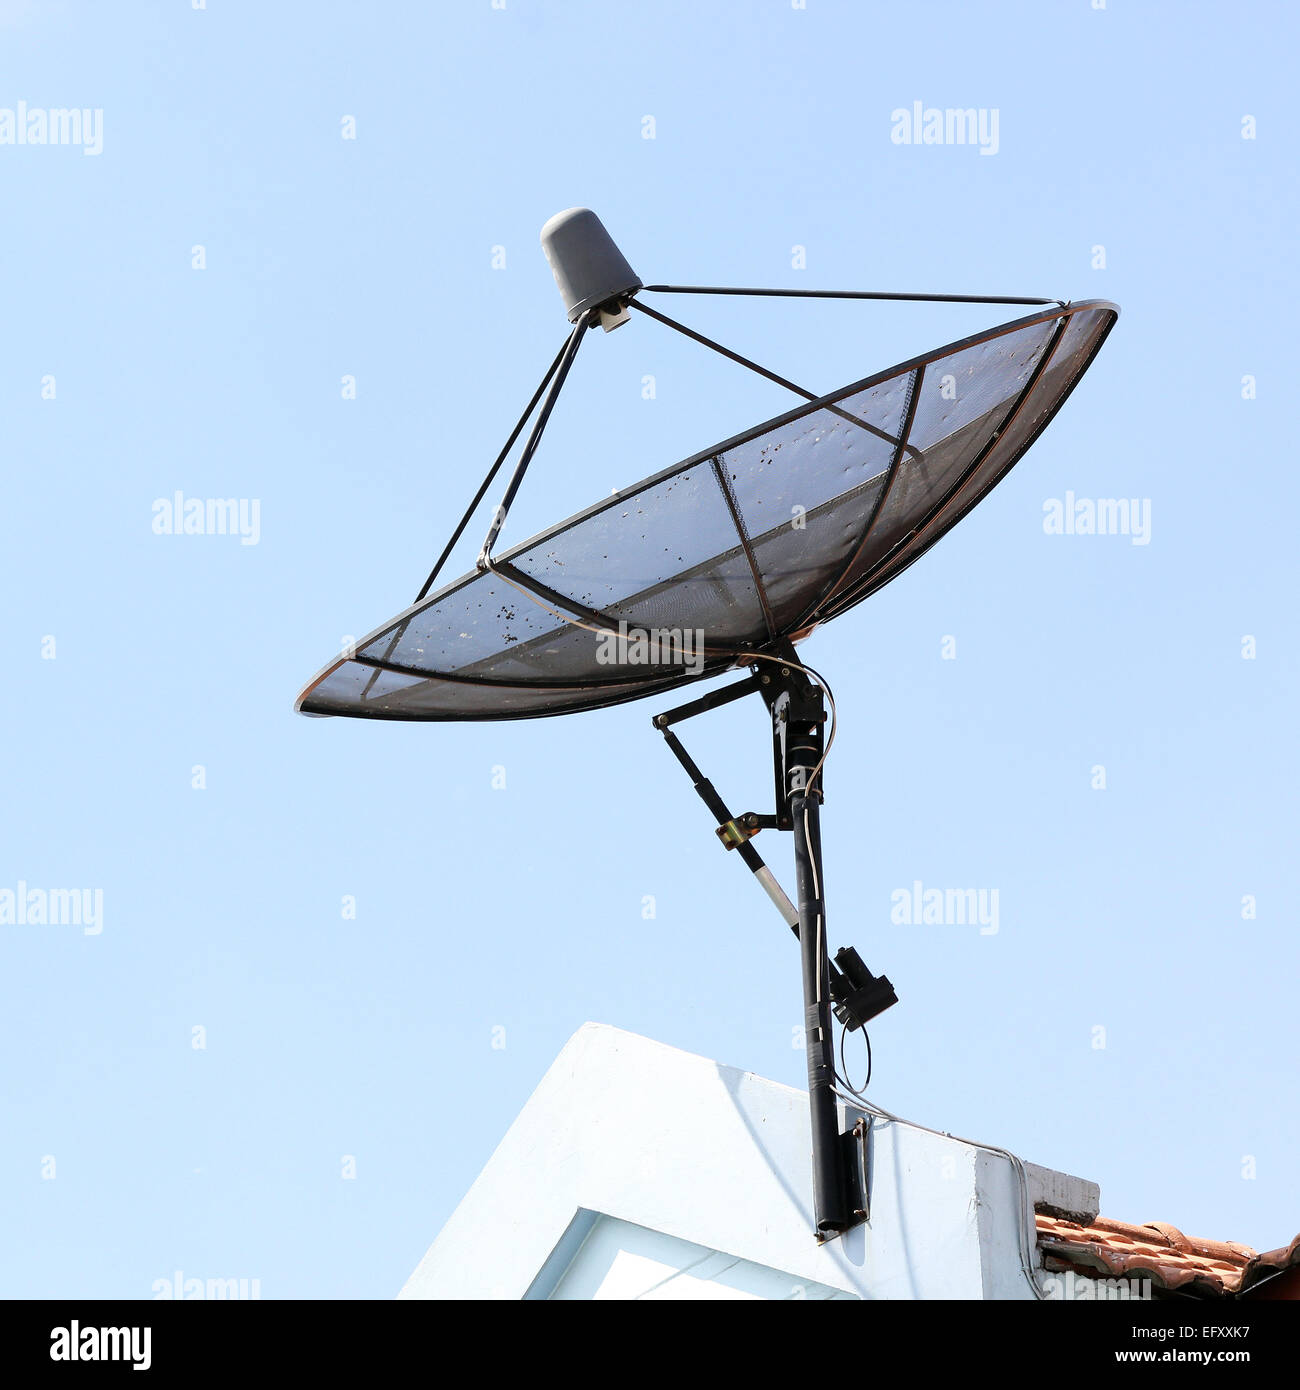 Satellite dish on roof with beautiful sky Stock Photo